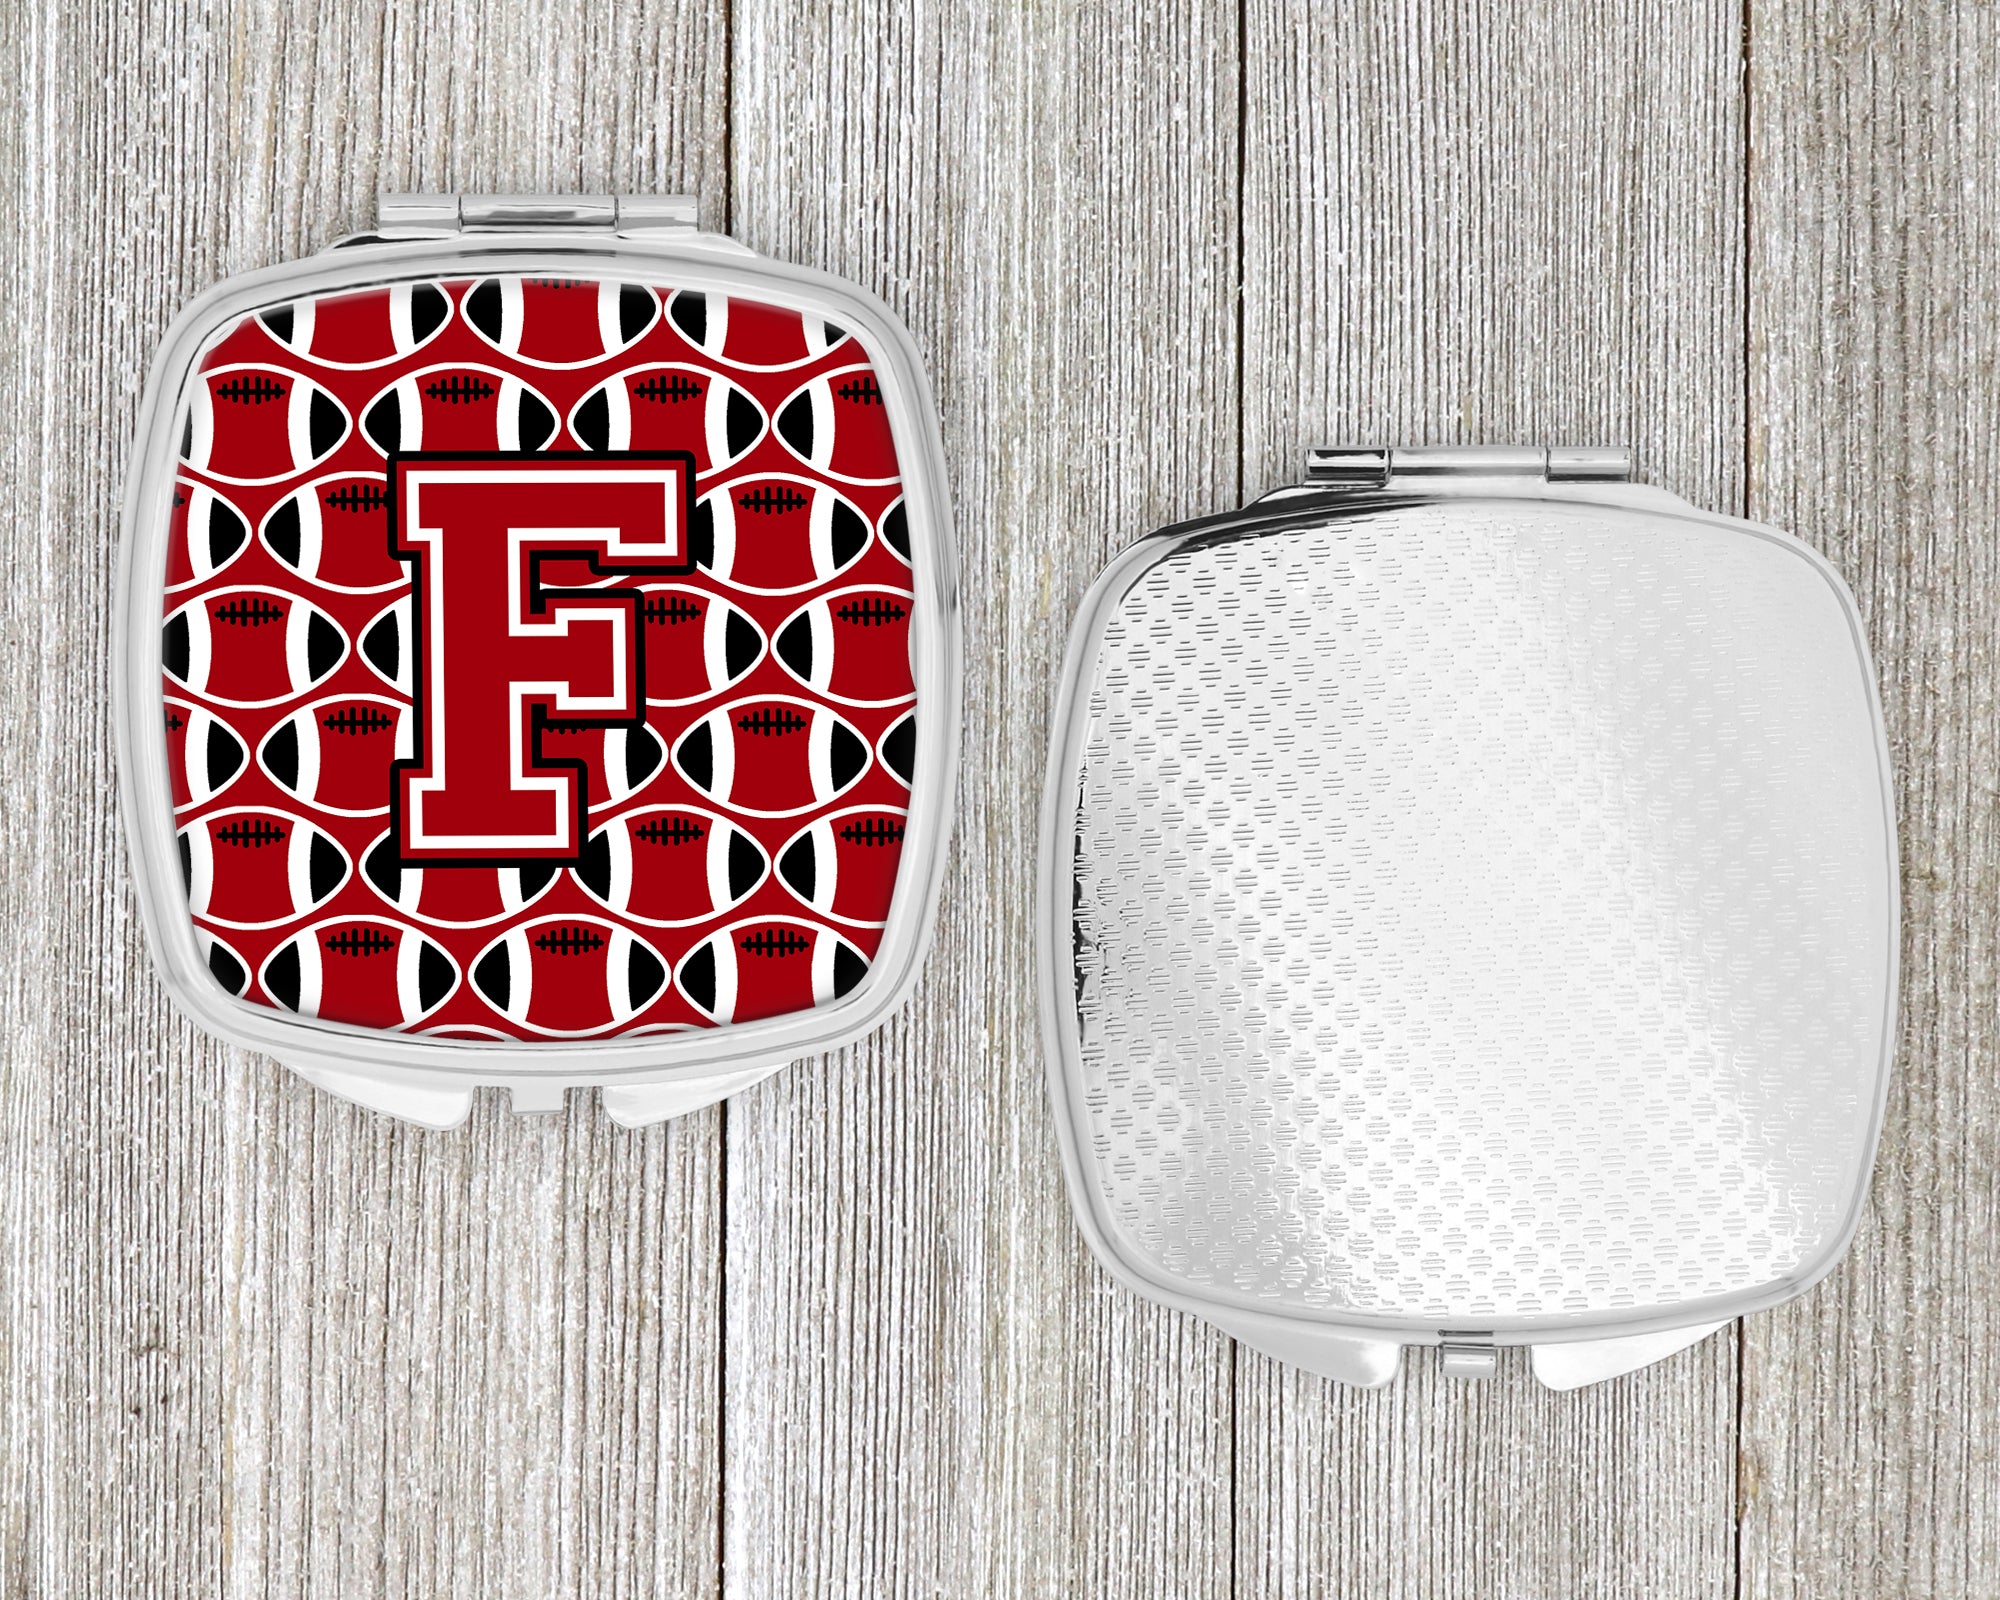 Letter F Football Red, Black and White Compact Mirror CJ1073-FSCM  the-store.com.